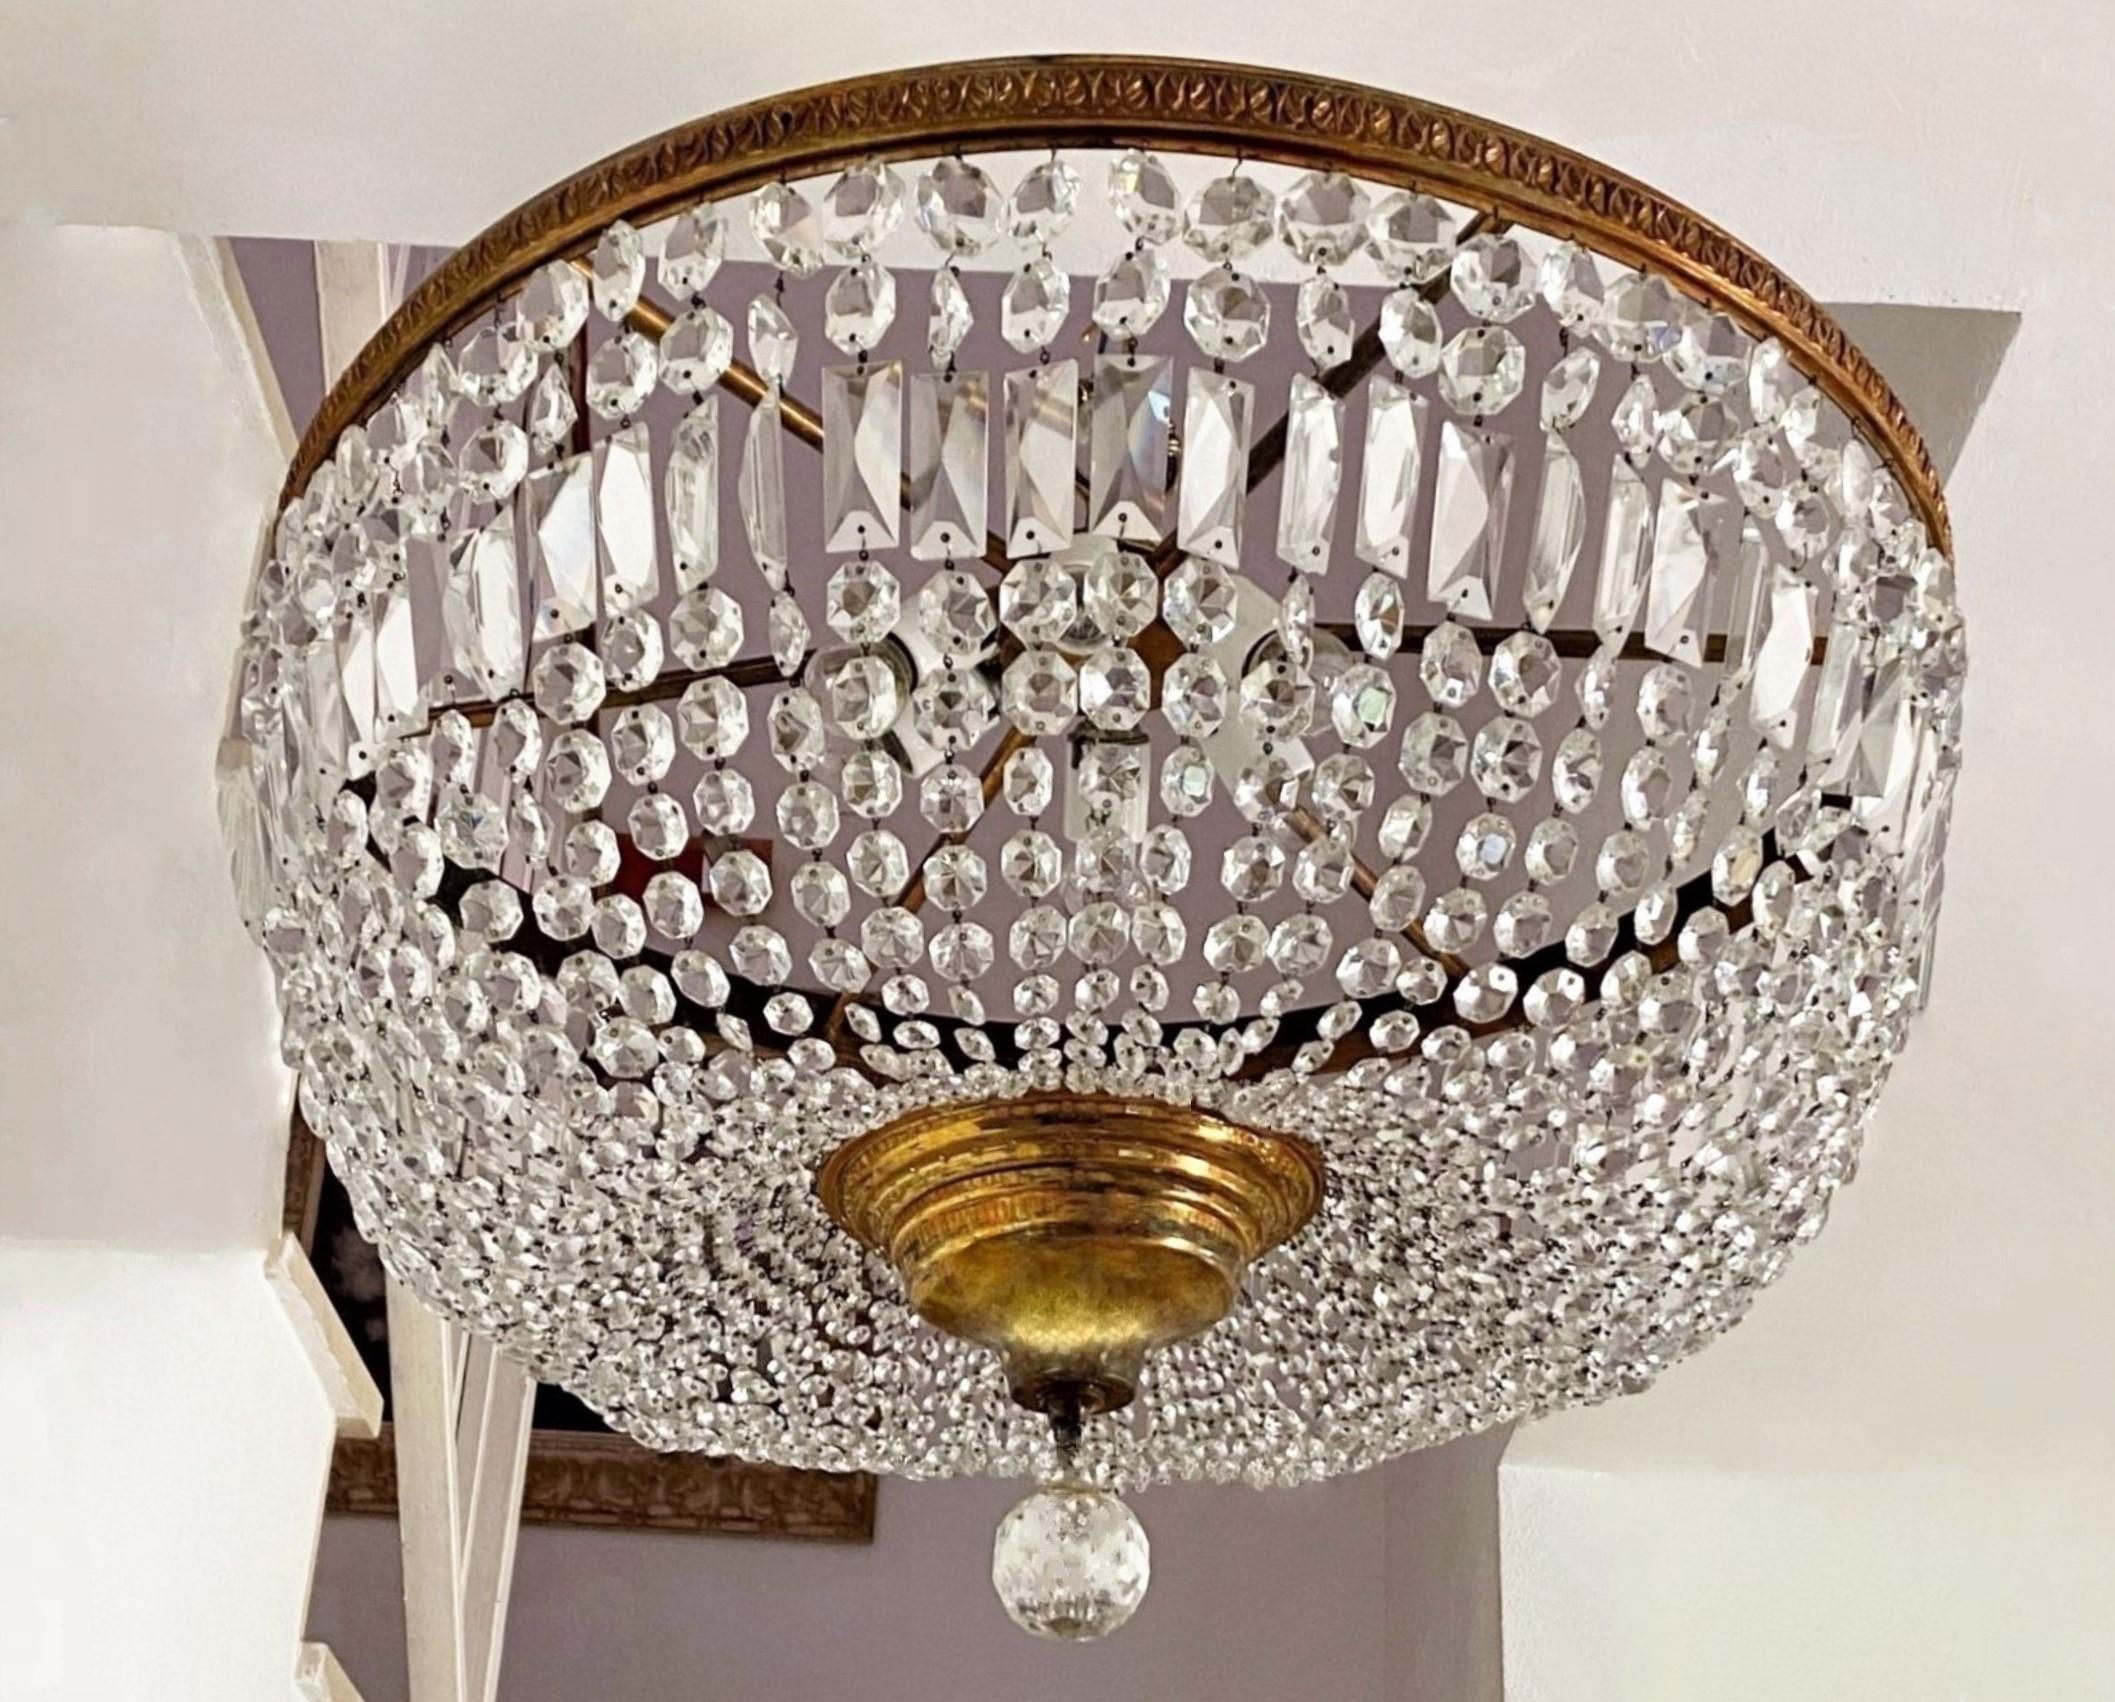 A monumental Art Deco faceted crystal six-light flush mount, France, 1950s. Chains of faceted crystal prismas in several sizes conneting to a solid gilt bronze frame forming a dome ending at the bottom with a large crystal ball. It takes six large